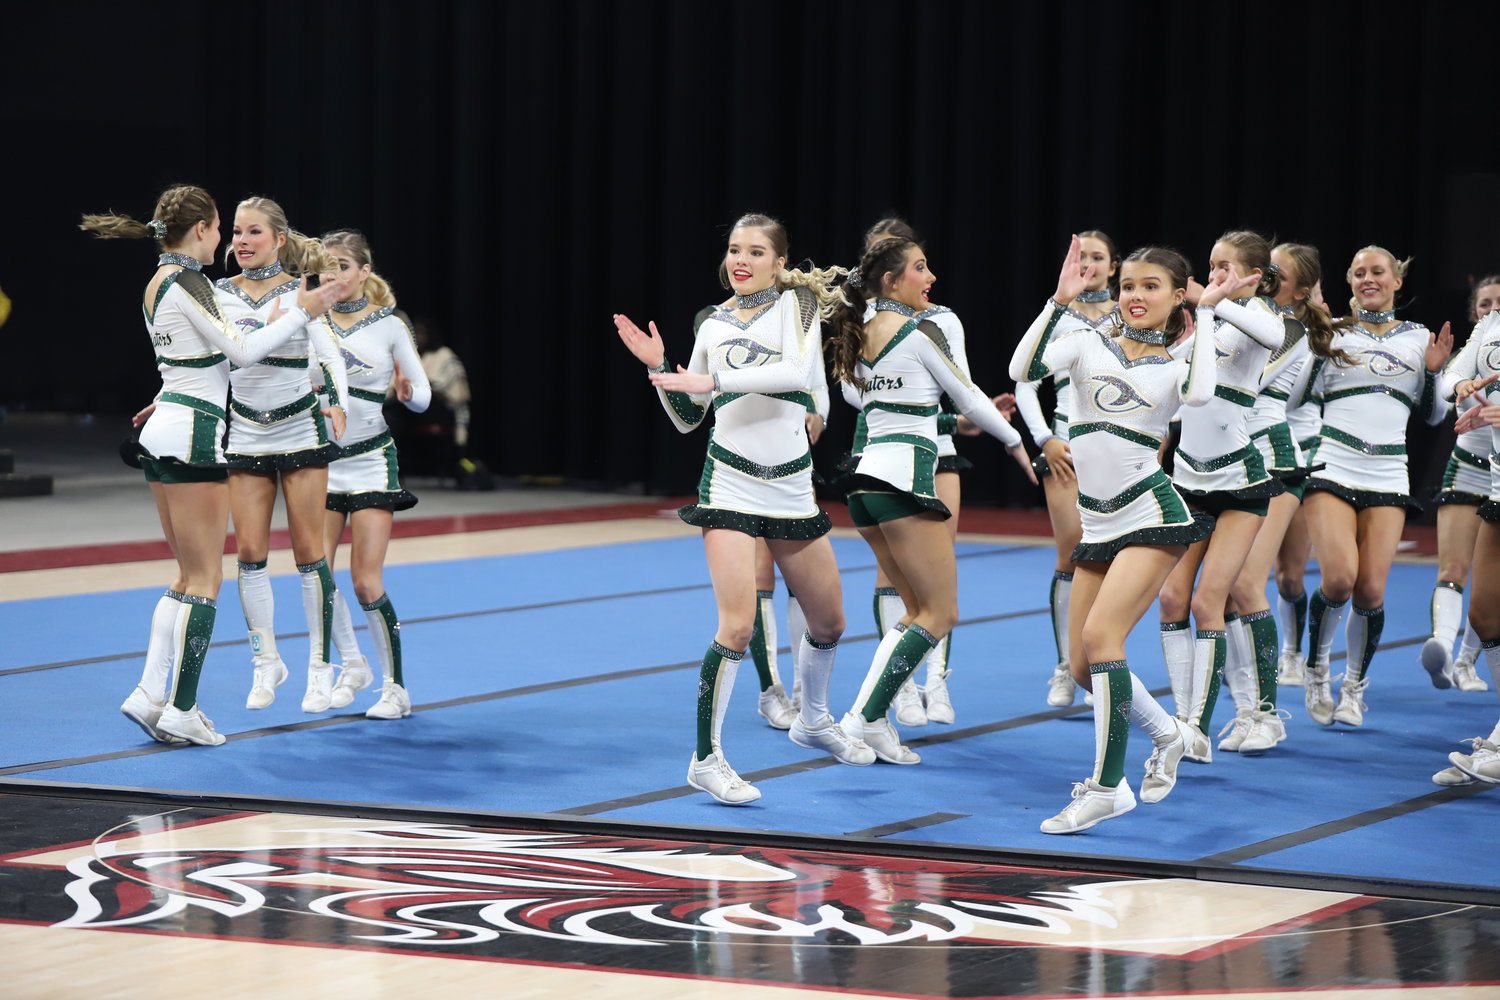 Redemption' for Lexington Competitive Cheer After Regaining Class